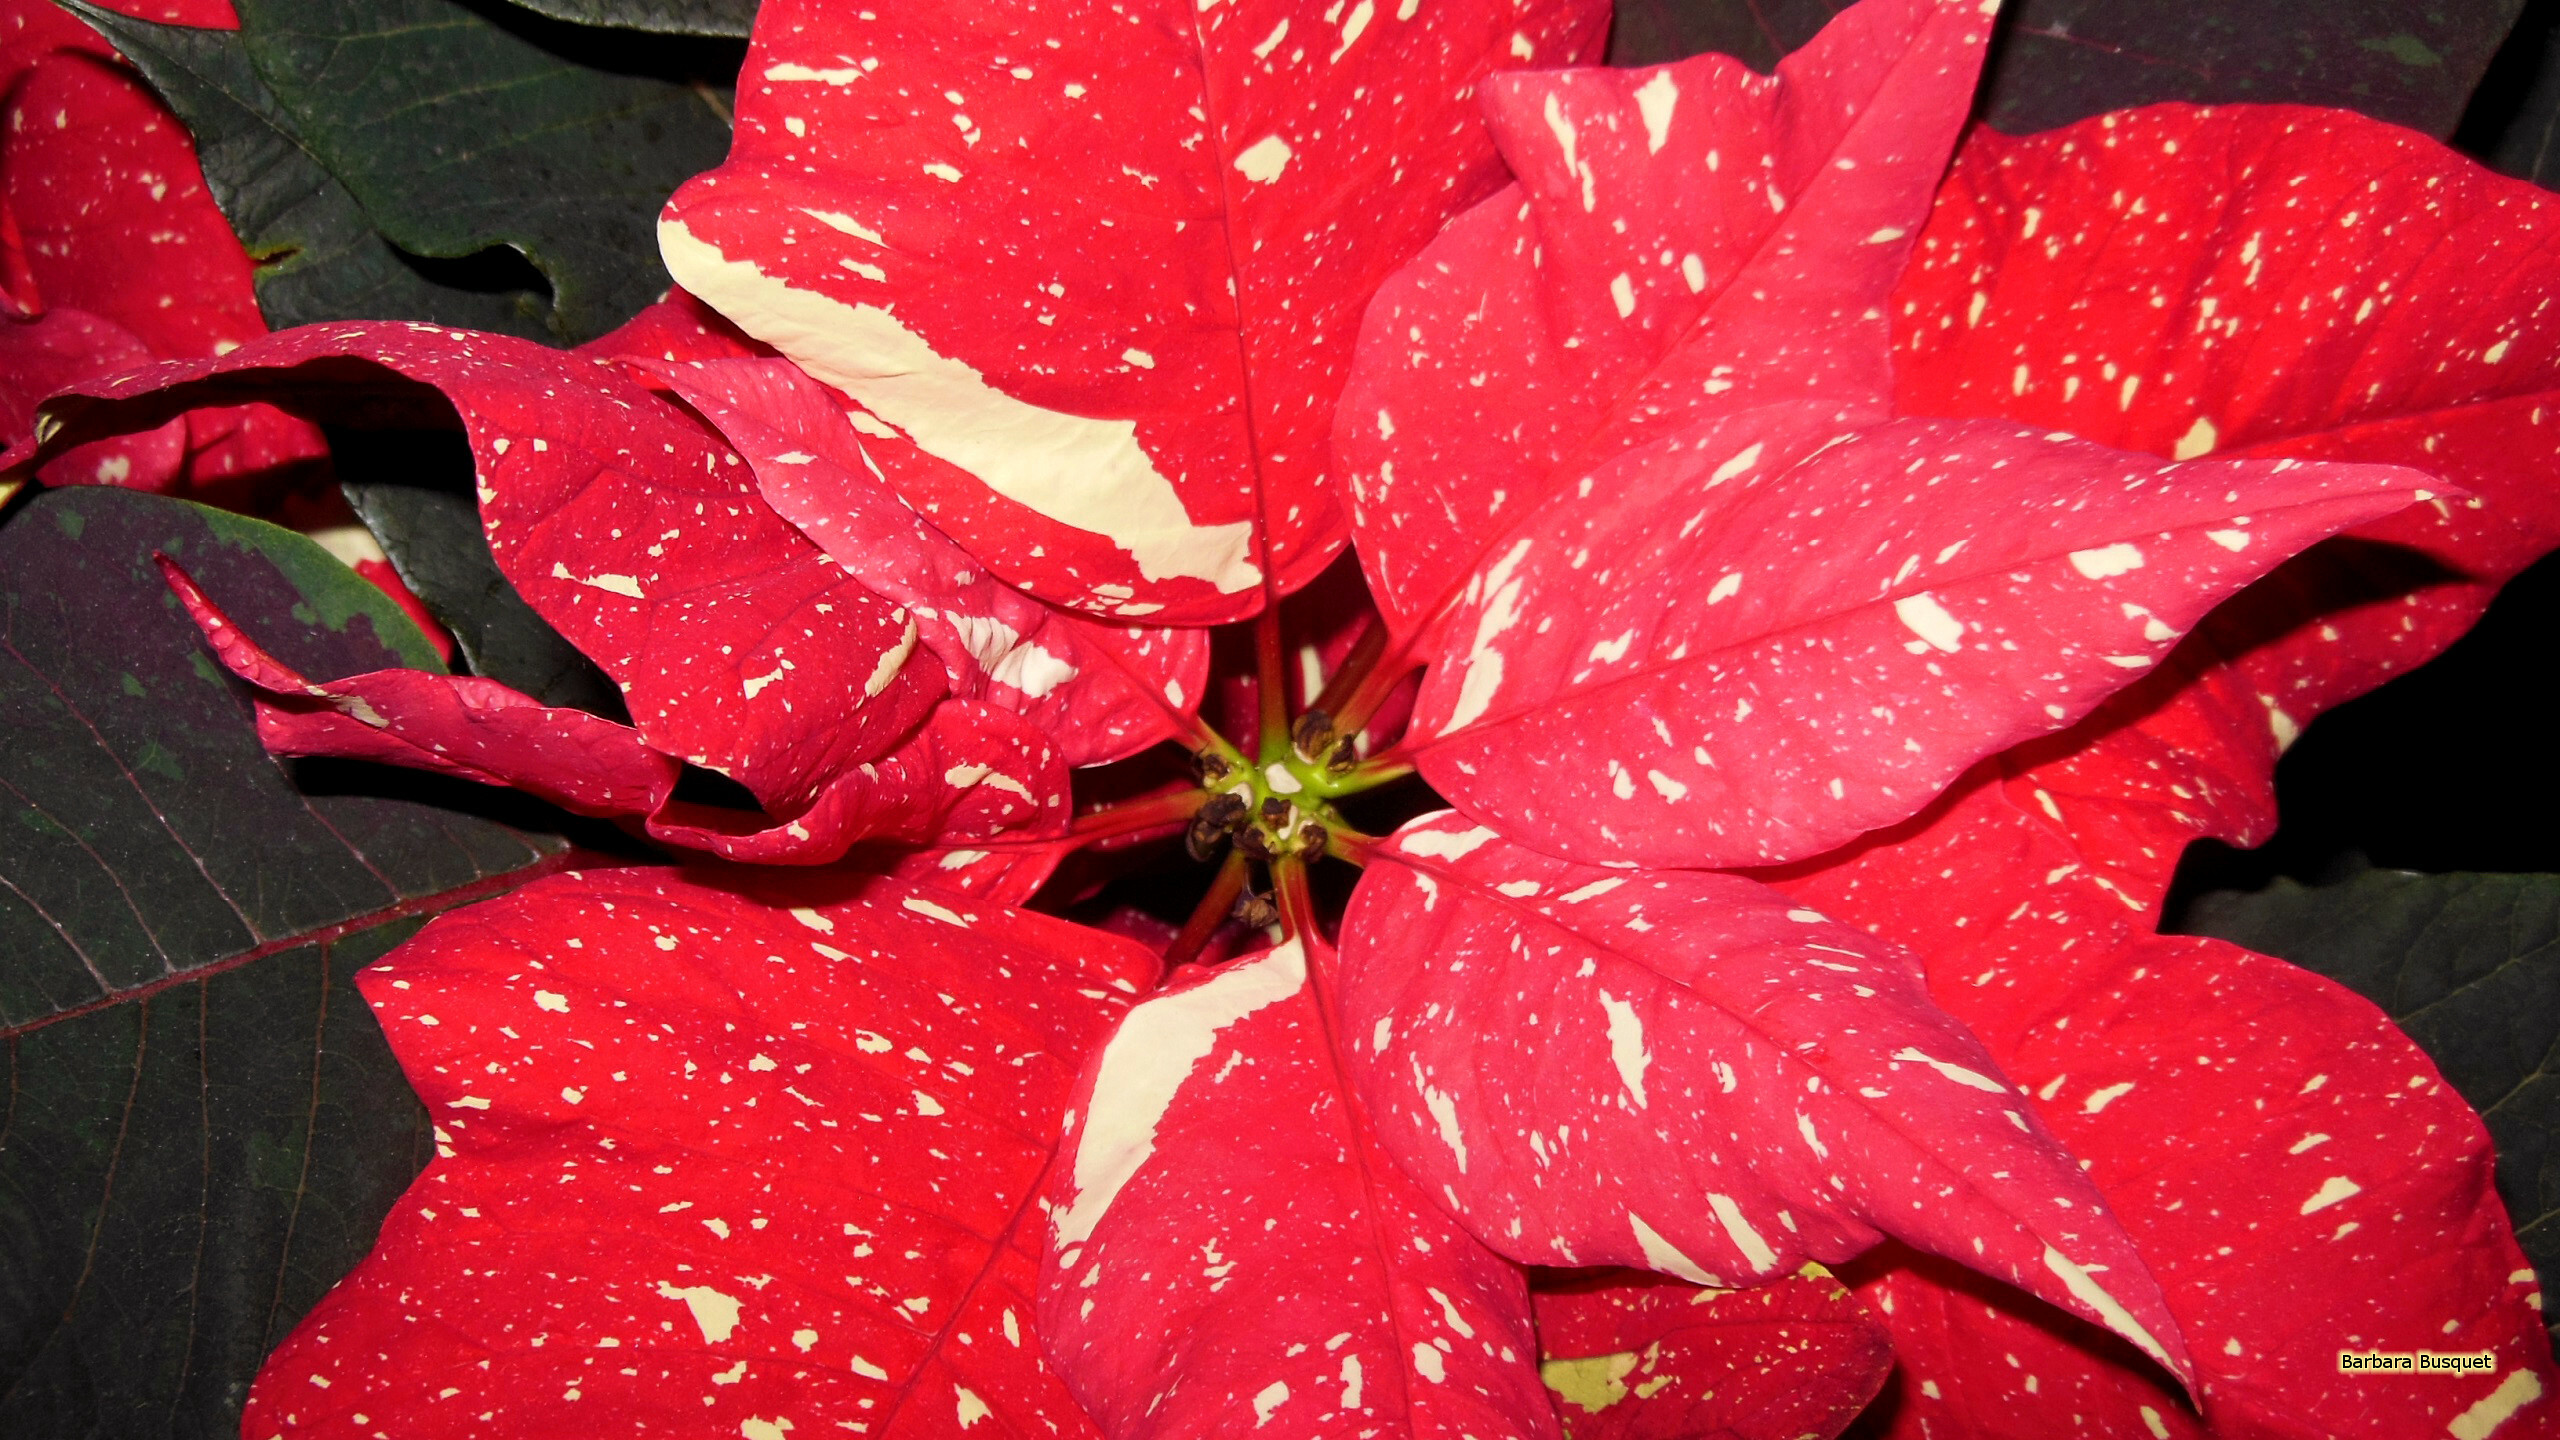 Poinsettia: The colored bracts—which are normally flaming red, with cultivars being orange, pale green, cream, pink, white, or marbled—are often mistaken for flower petals because of their groupings and colors, but are actually leaves. 2560x1440 HD Background.